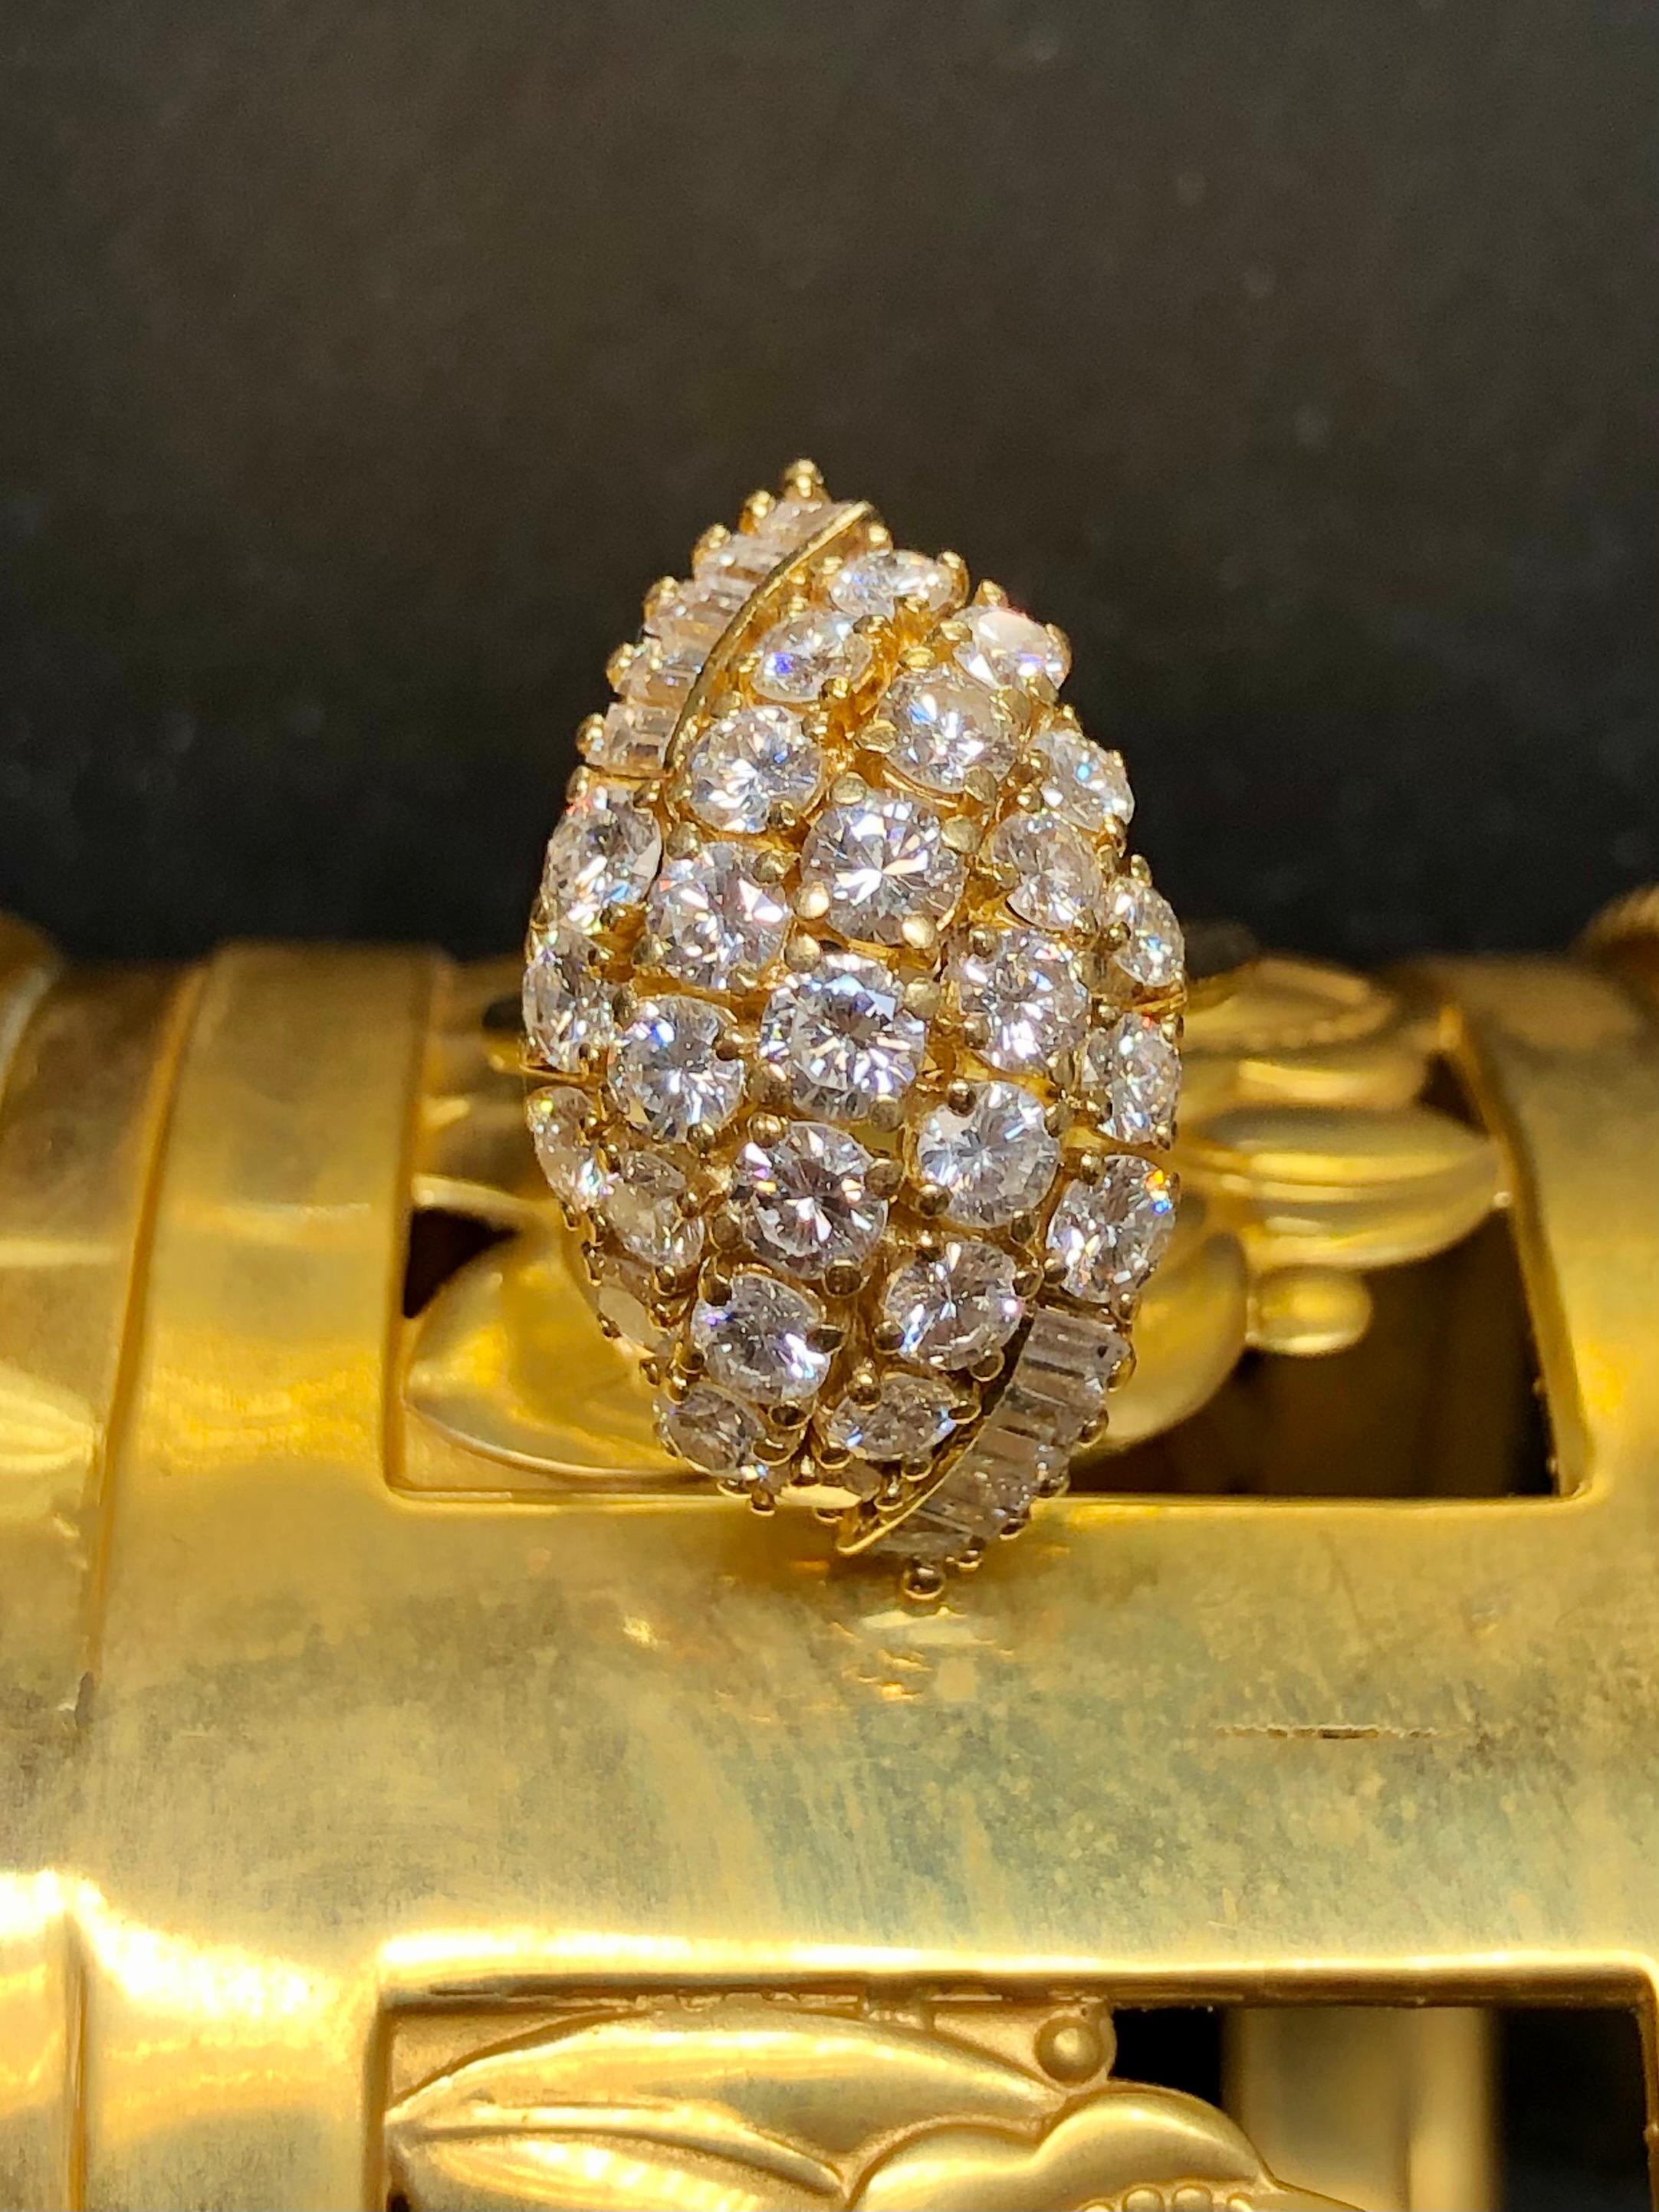 A gorgeously done vintage cocktail ring done in 18K yellow gold and prong set with approximately 3.65cttw in F-G color Vs1-2 clarity larger round and baguette diamonds.


Condition:

All stones are securely set and in perfectly wearable